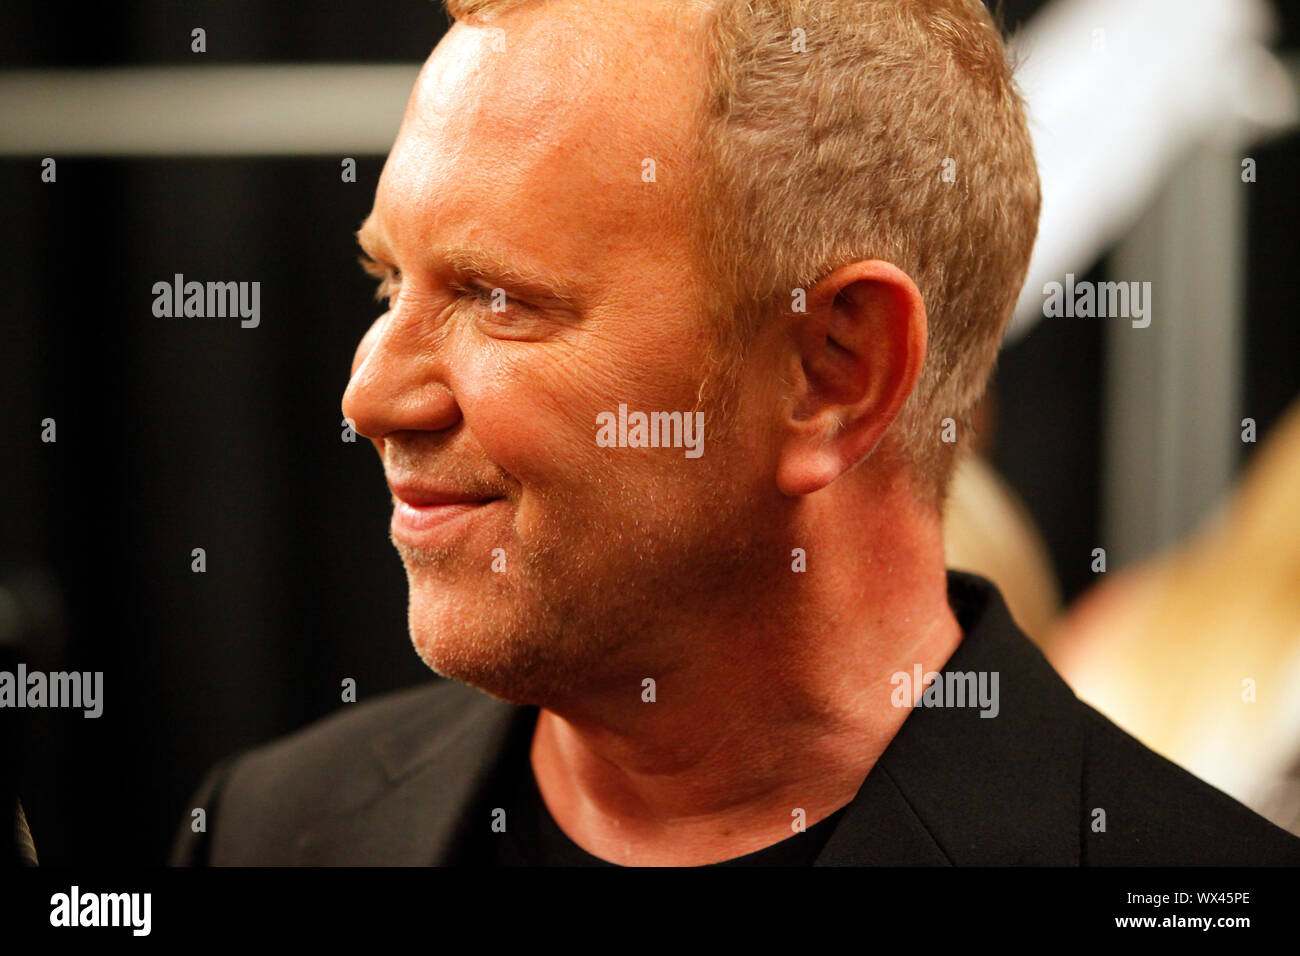 Designer michael kors hi-res stock photography and images - Alamy